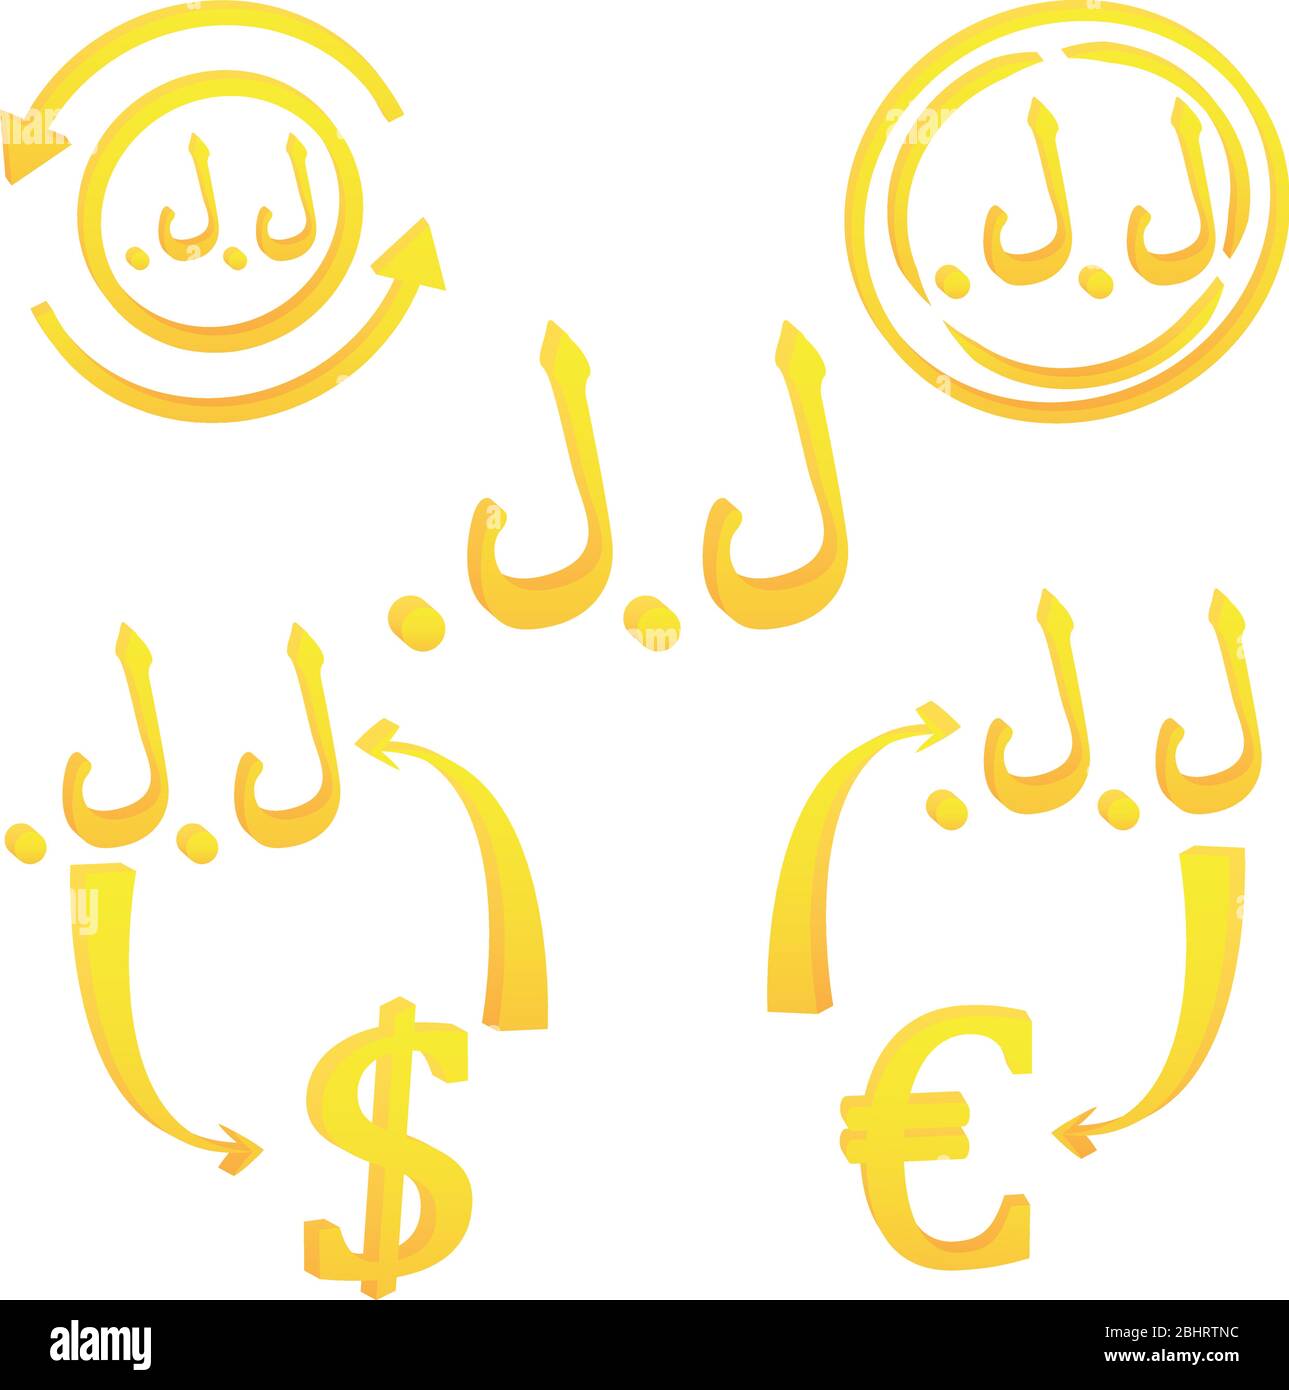 3D Lebanese pound currency symbol of Lebanon. Stock Vector